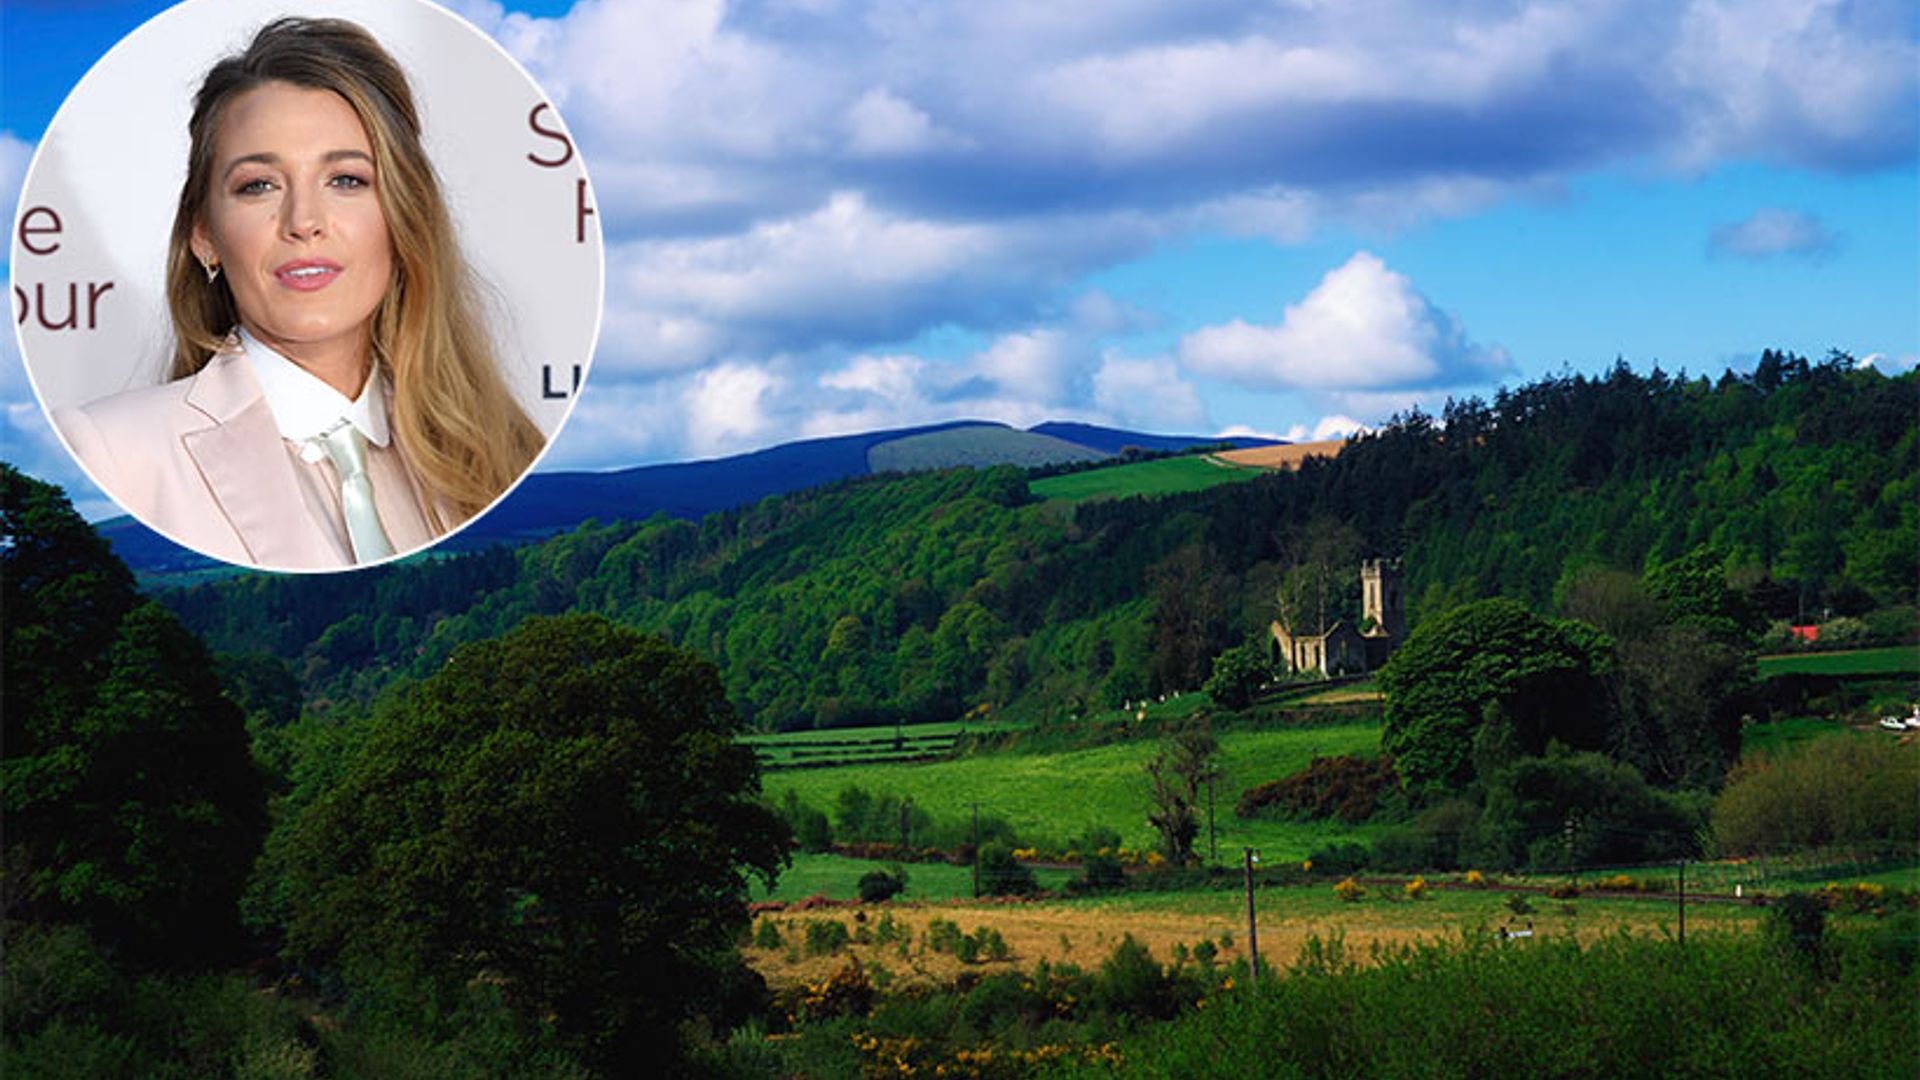 Blake Lively begs fans to visit this hidden gem in Ireland – and it looks magical